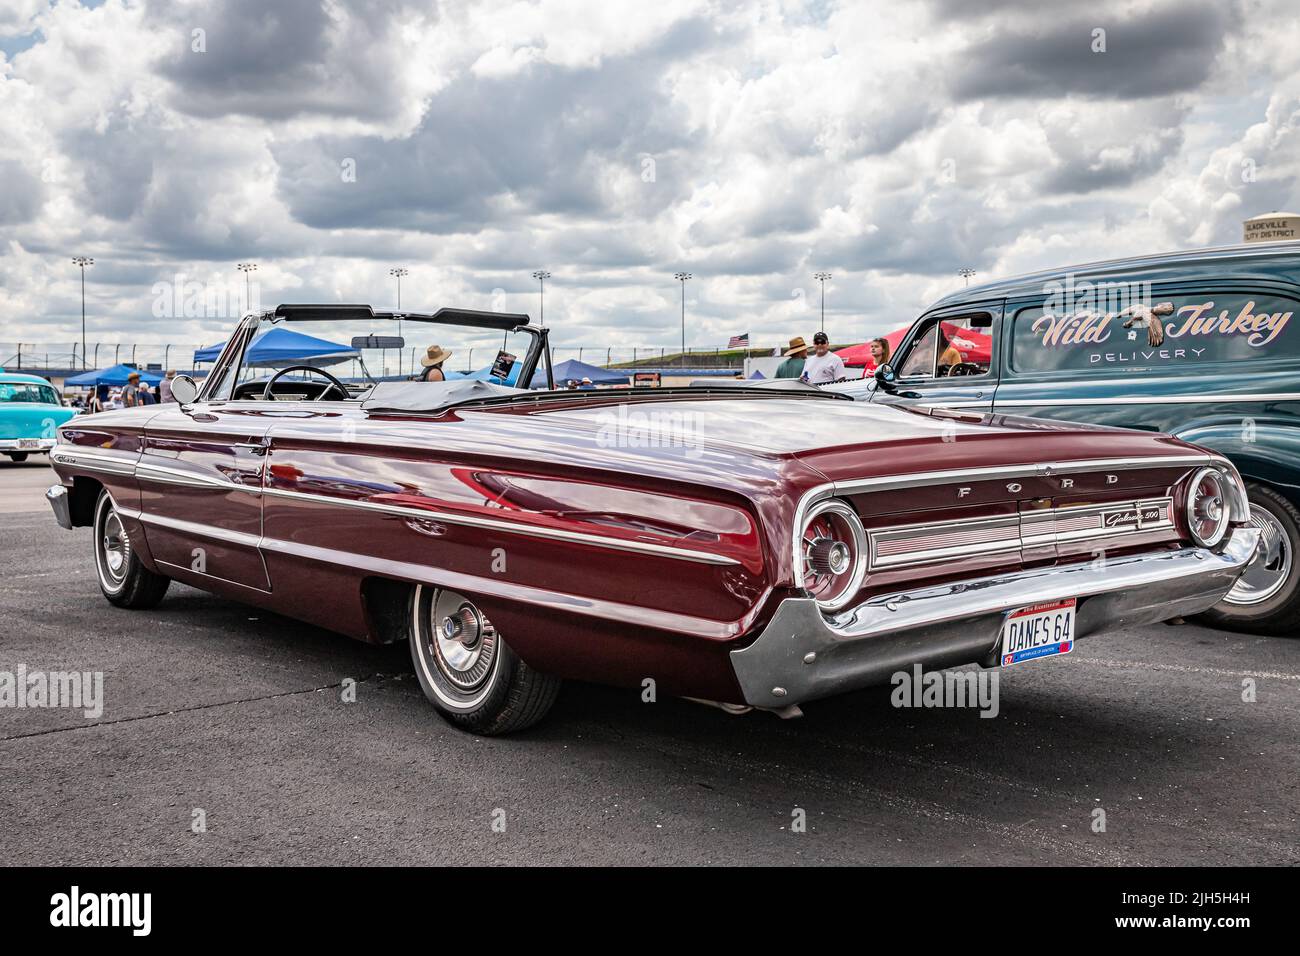 Lebanon, TN - May 14, 2022: Low perspective rear corner view of a 1964 Ford Galaxie 500 Convertible at a local car show. Stock Photo